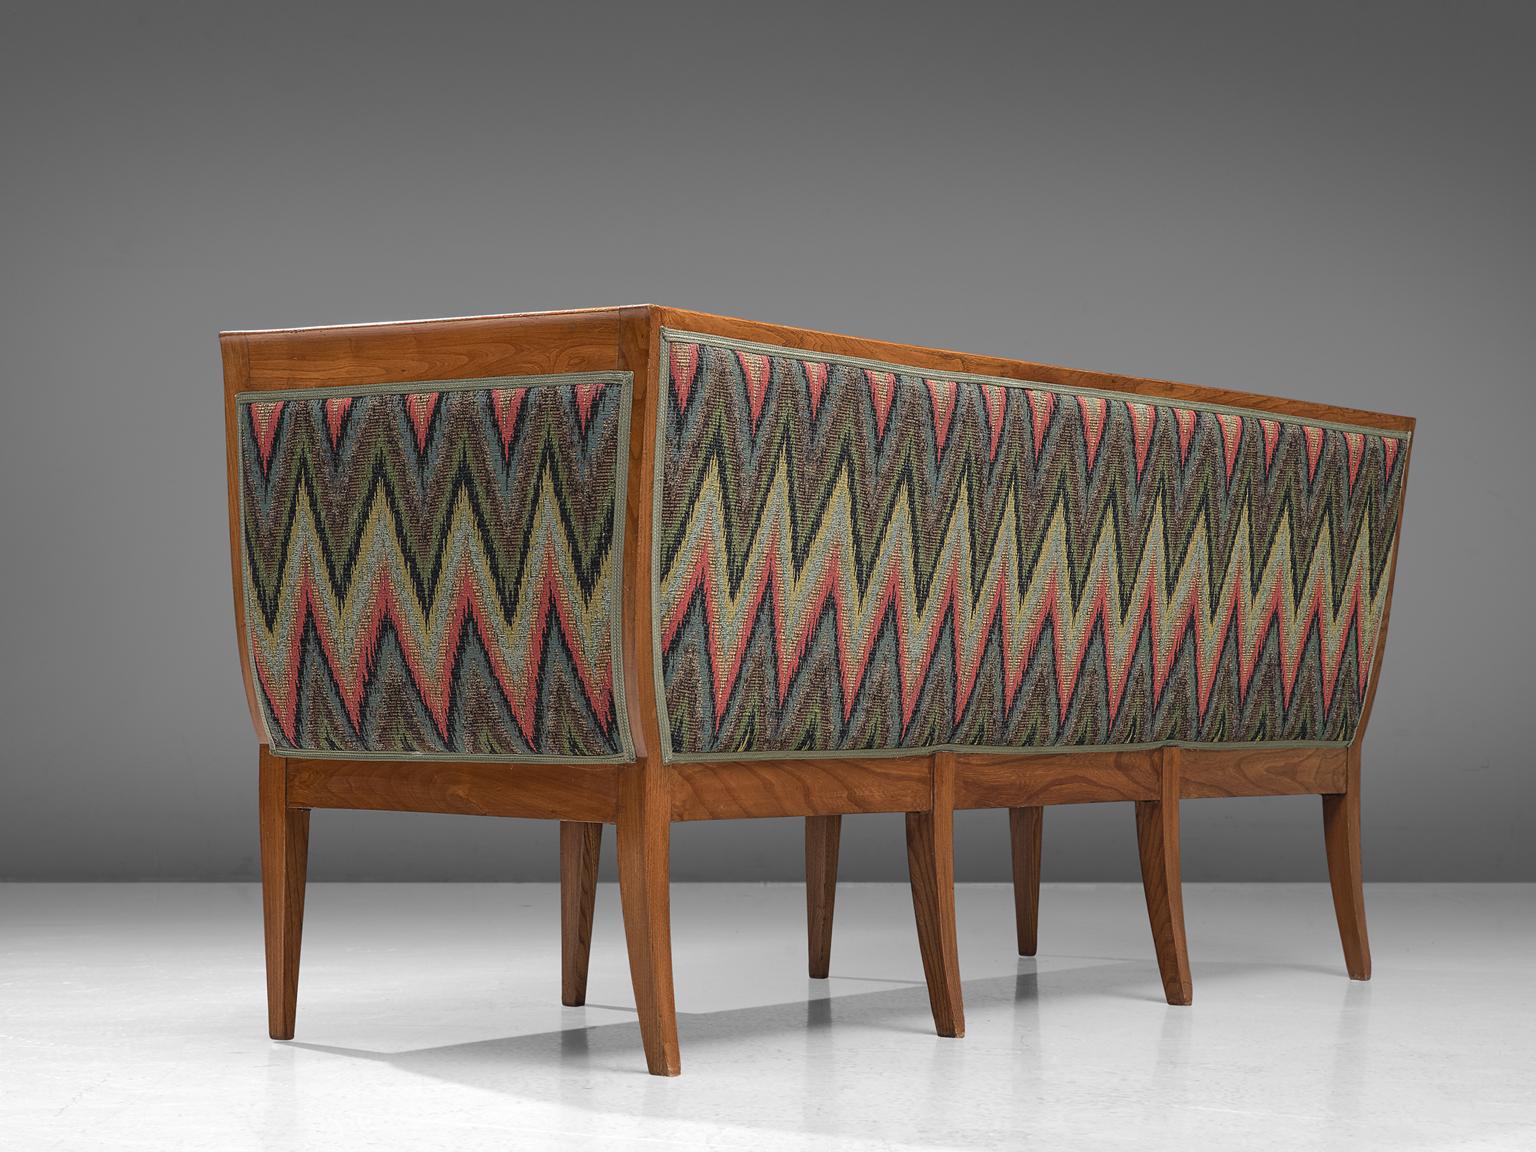 Mid-20th Century Art Deco Sofa Reupholstered in Multicolored Woven Fabric